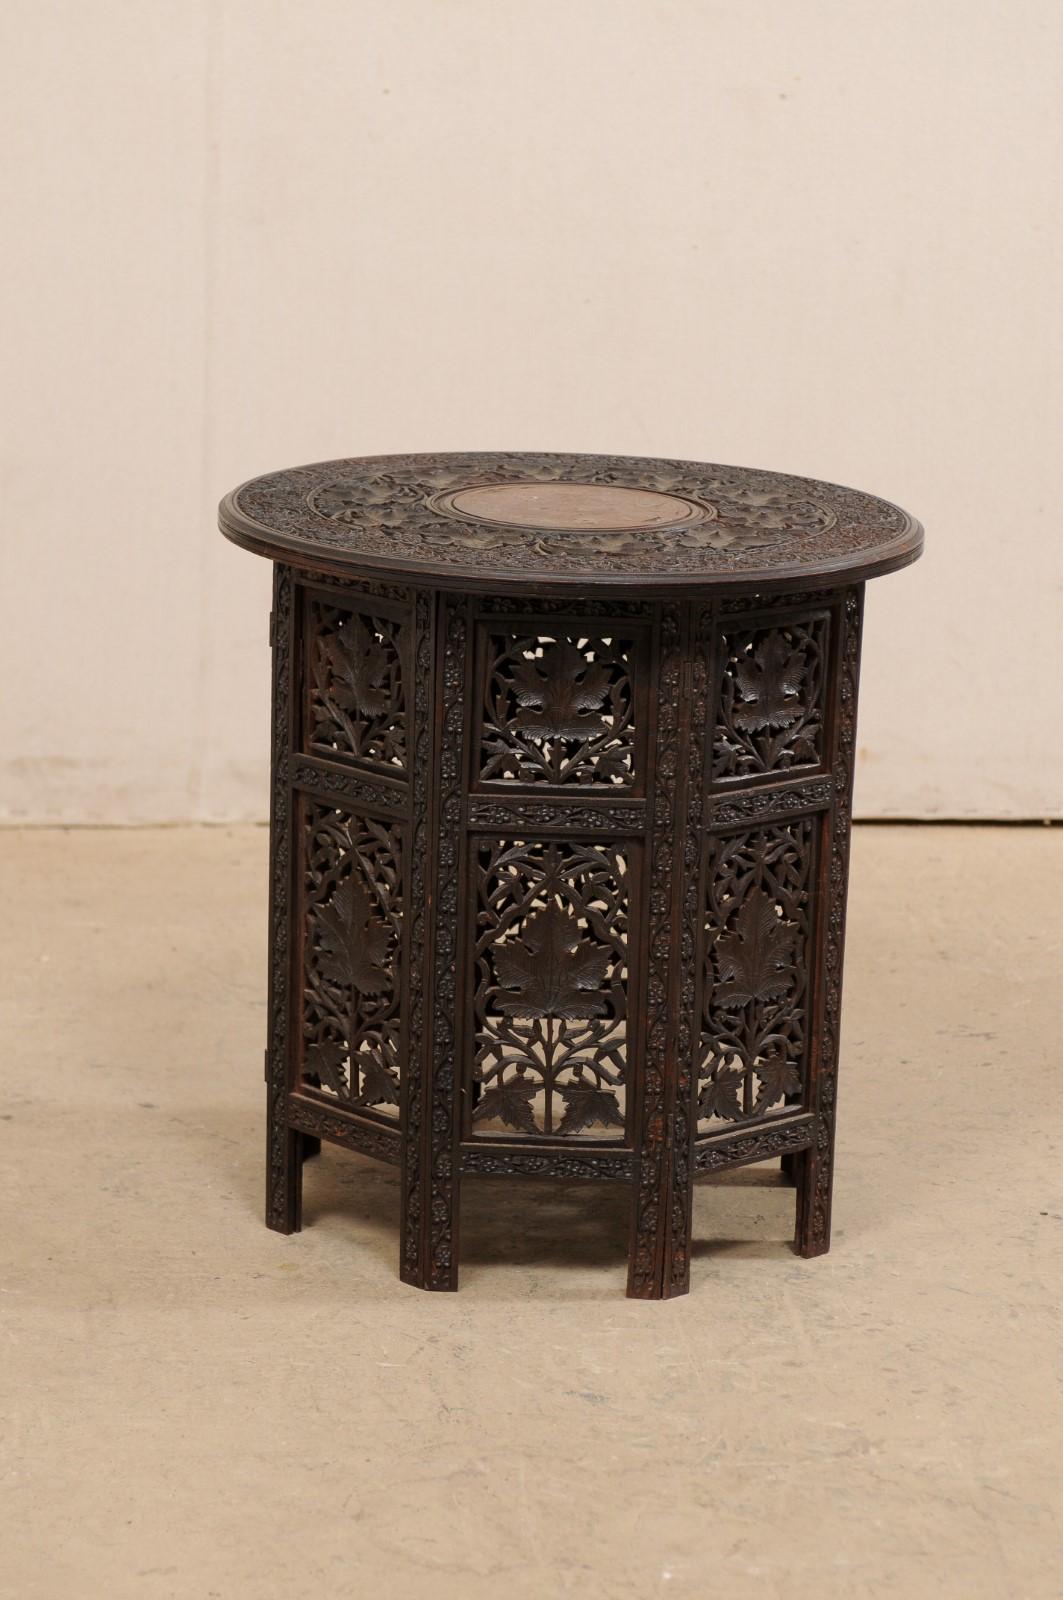 An Anglo-Indian hand carved side table with round top from the mid-20th century. This vintage table from India, with a round-shaped top measuring approximately 21